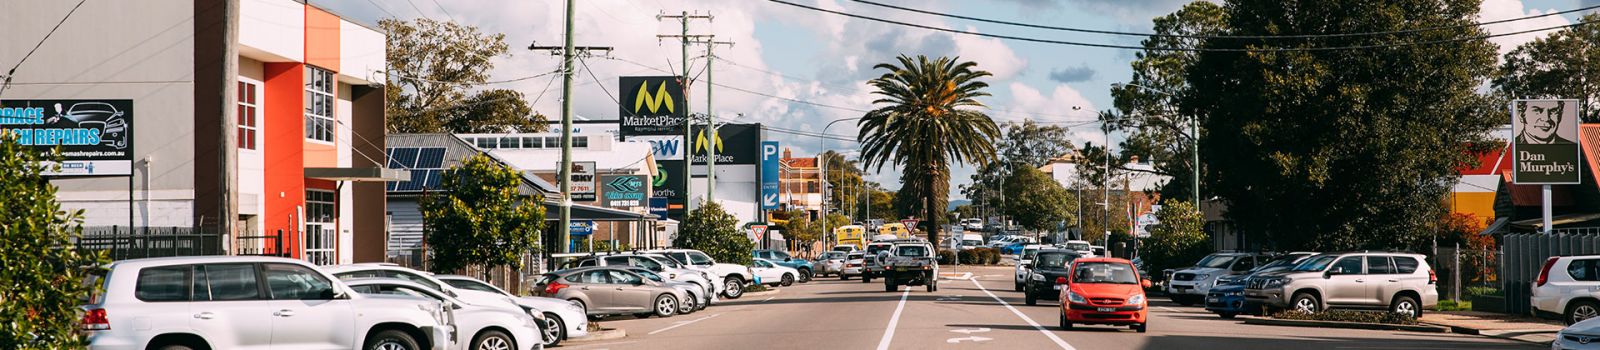 Image of a busy street in Port Stephens banner image